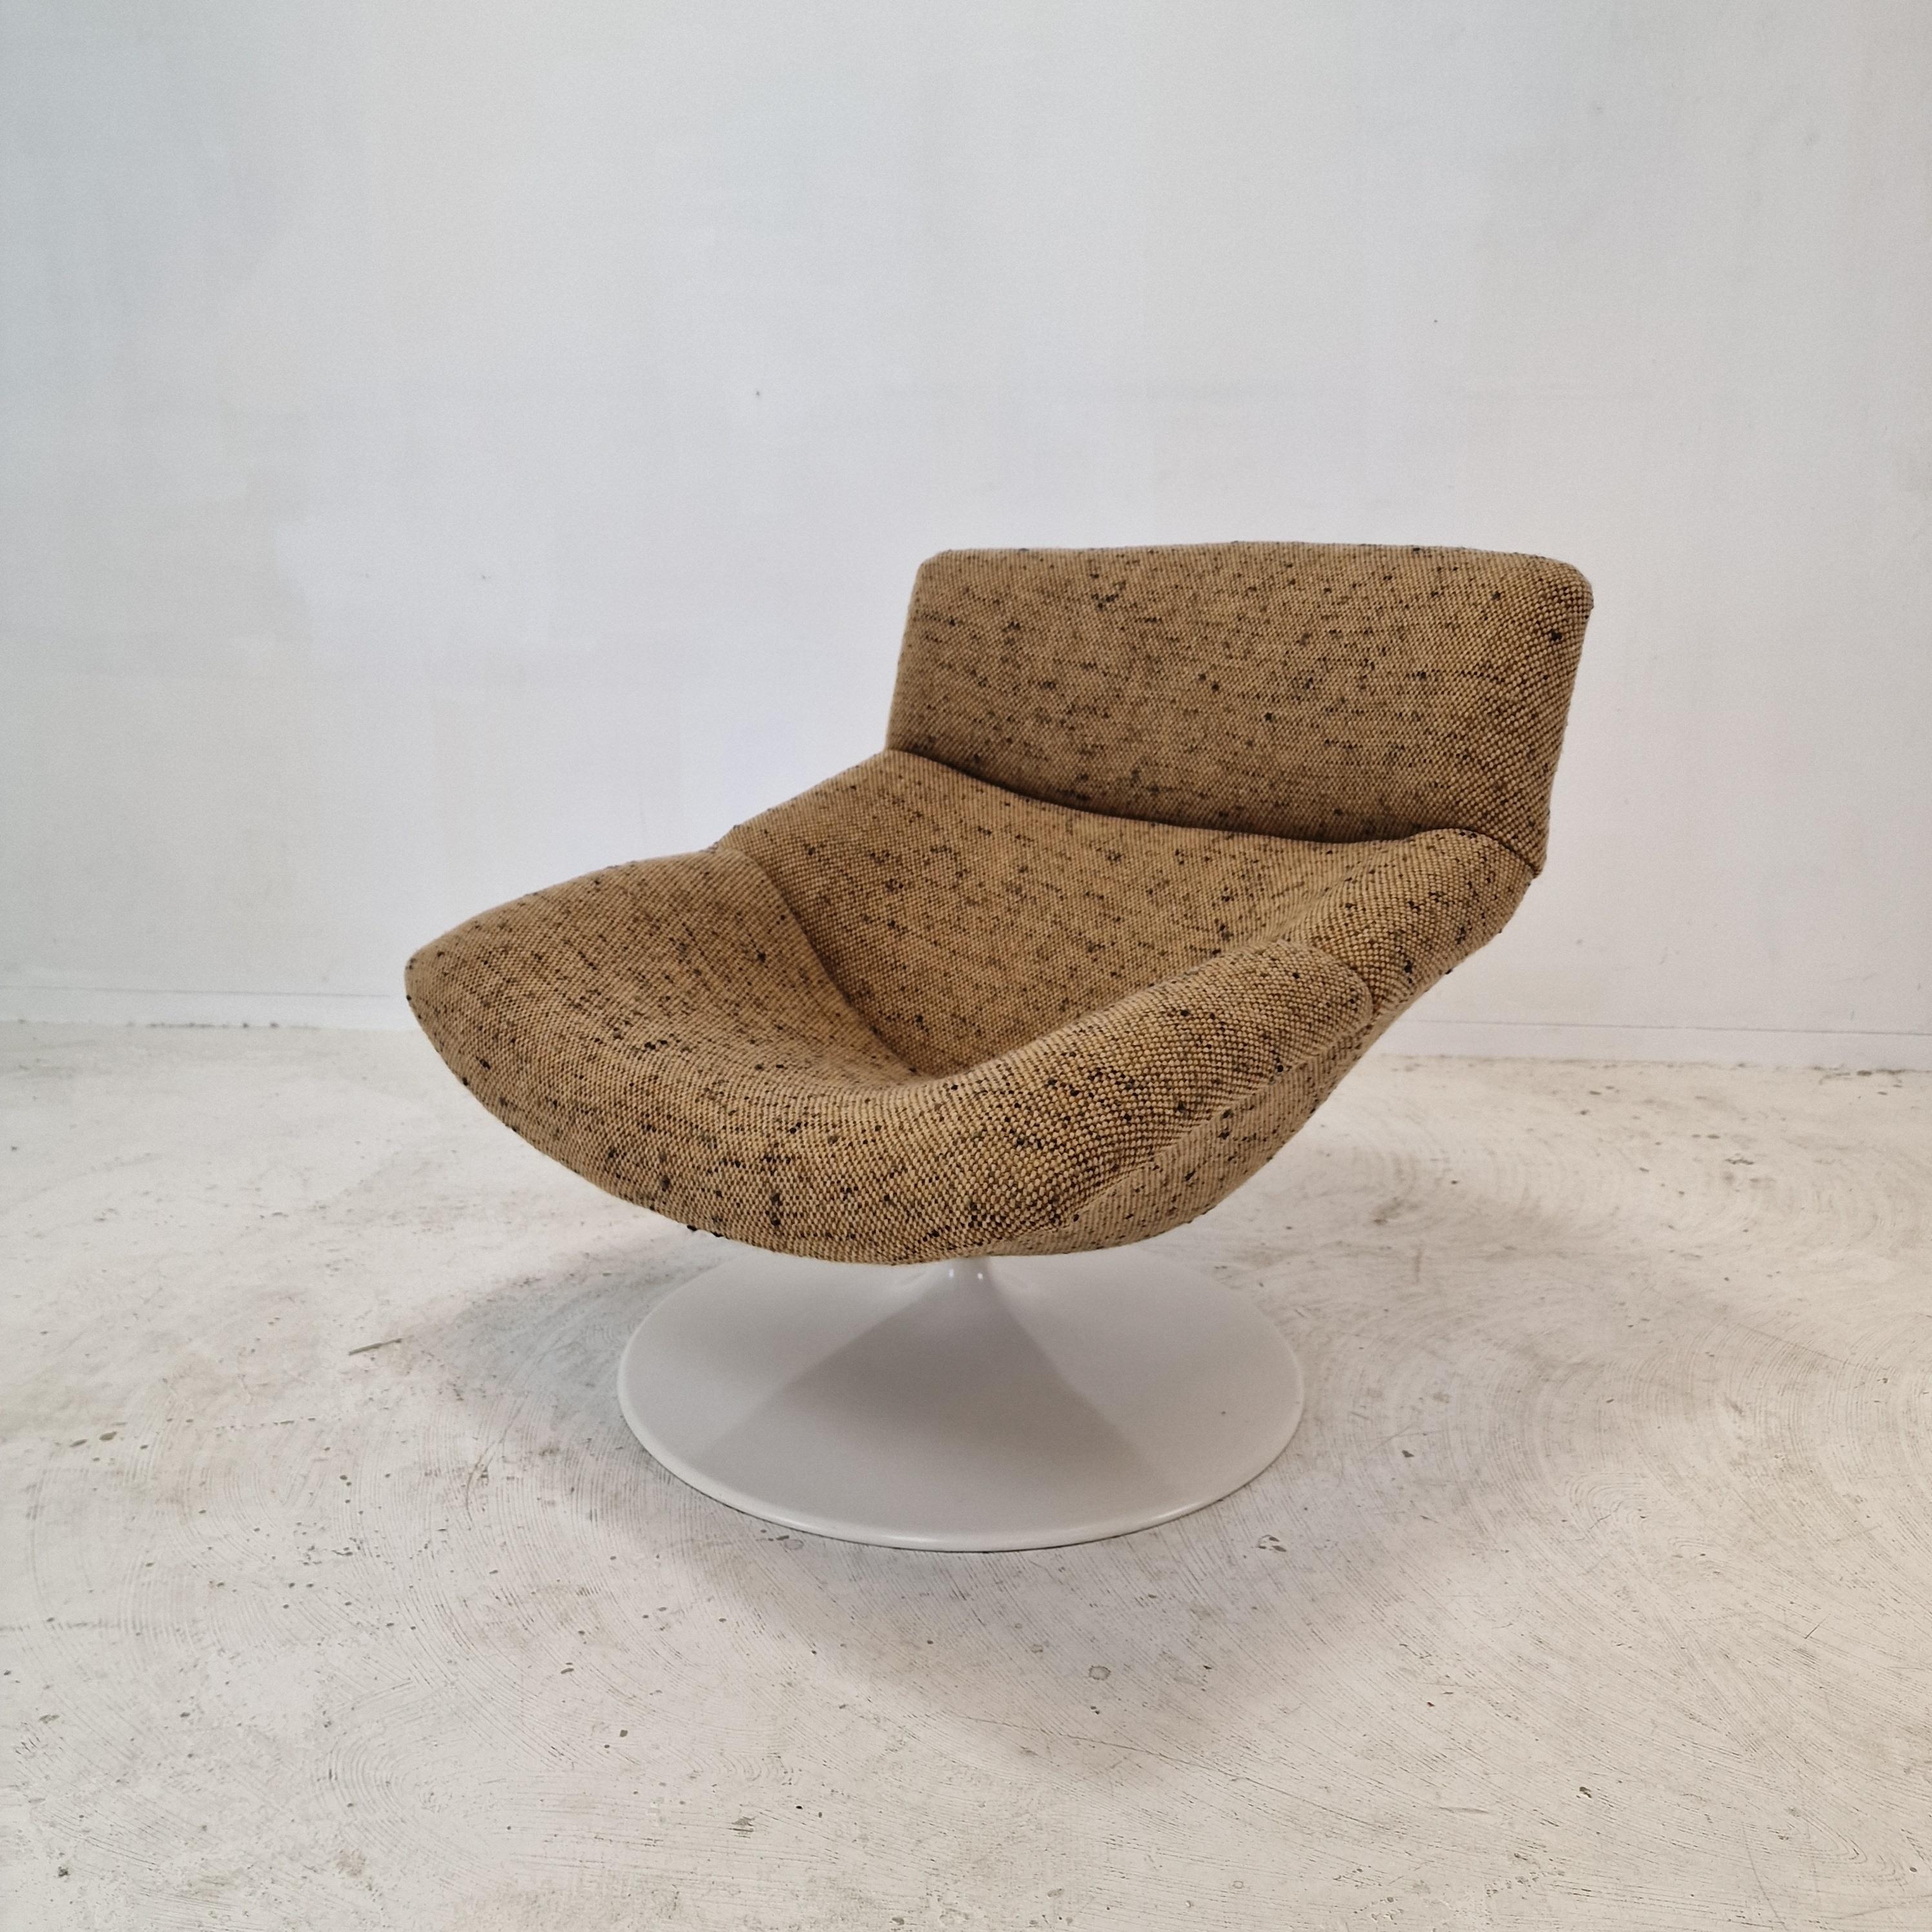 Extremely comfortable Artifort F518 lounge chair. 
Designed by the famous English designer Geoffrey Harcourt in the 70's. 

Very solid wooden frame with a large pivoting metal foot.

The chair is just restored with new fabric and new foam, it is in